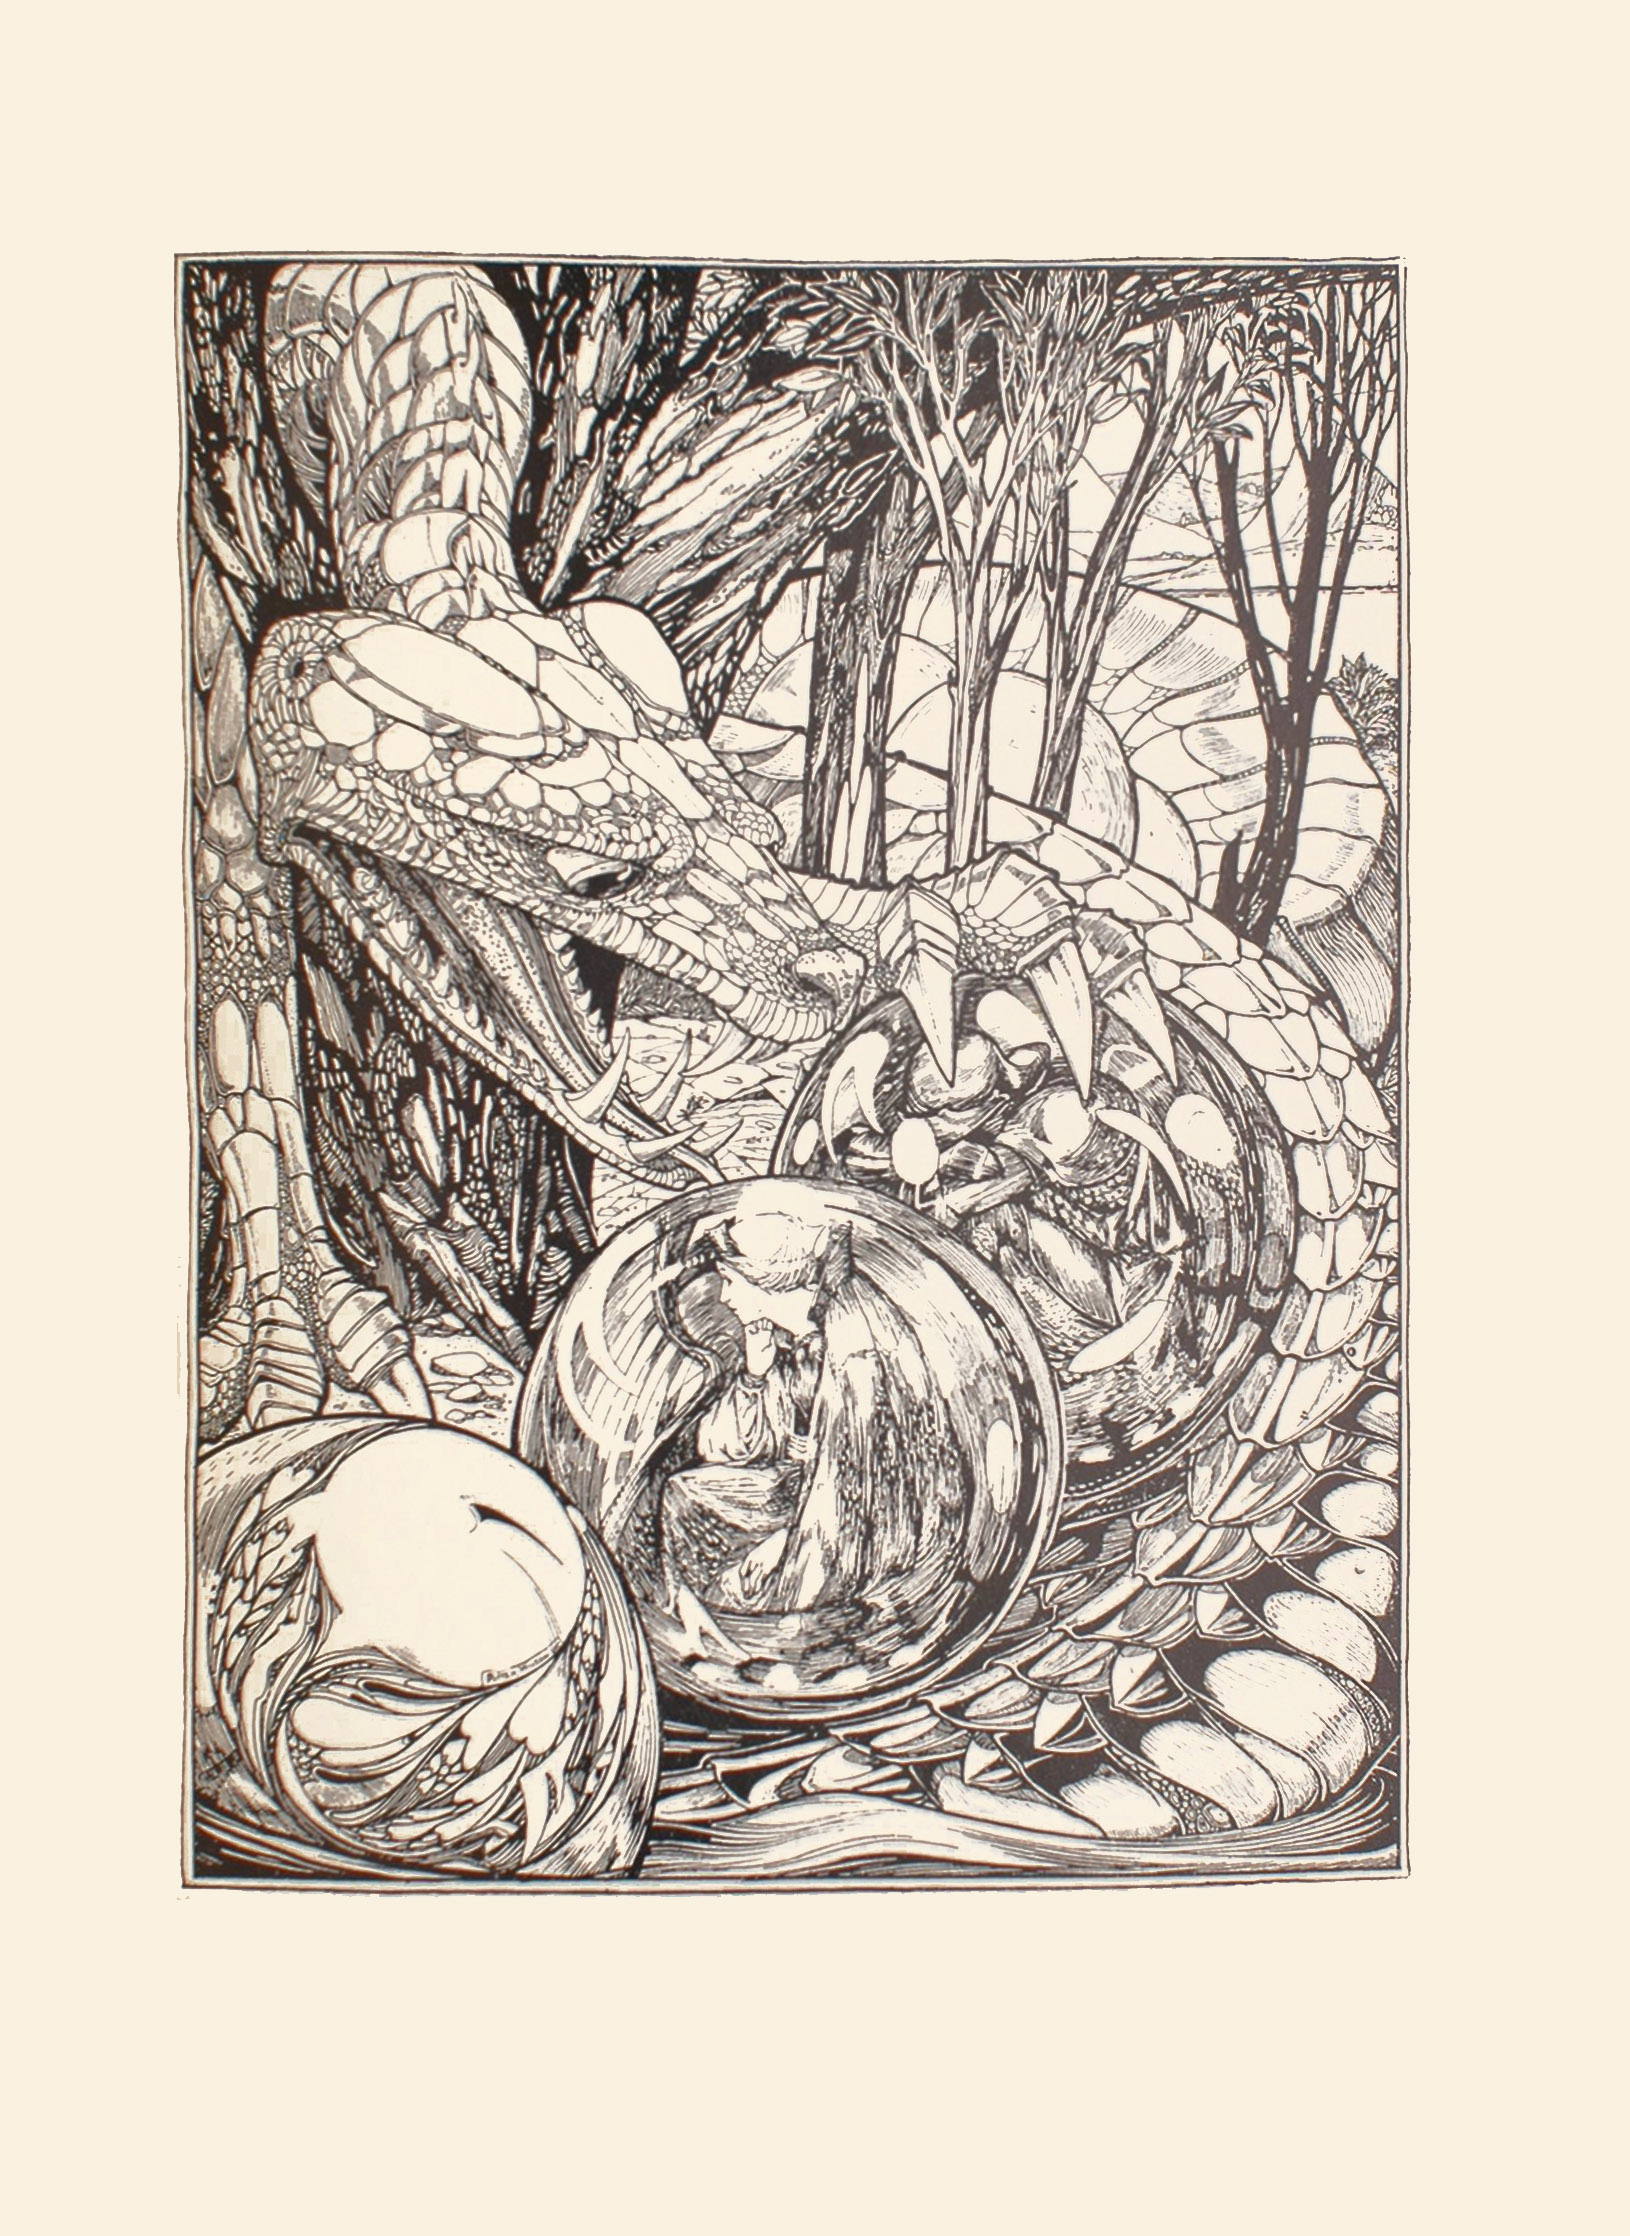 The image is of a large fantastical lizard like creature or dragon wrapping itself around six orbs and five trees The trees have leaves on their branches and in the background there are rolling hills sparse shrubbery and a large tent like object in the upper right corner of the image The body of the creature encircles three light coloured opaque spheres behind the trees in the mid-ground and three transparent orbs in the foreground Two of the transparent orbs have human figures in profile facing left The farthest one contains a male figure kneeling down with his head hidden from view and arms wrapped around his knees He is wearing a helmet and body armour The middle orb contains a woman kneeling down with her head resting against her right knuckles while her elbow rests on her right thigh Her left hand is resting against her left thigh Her light coloured hair is fashioned into an up do and she is wearing a long-sleeved dress and high-collared cloak The third transparent orb located in the extreme foreground at bottom left displays the reflection of the creature s right eye magnified in size the other two orbs reflect the creature s scales and fangs The creature s scaled head is tilted towards the orb holding the male figure eyes gazing downwards at the orb Its left claws are on top of the sphere and its mouth is wide open baring long sharp fangs and long speckled tongue at the object The image is vertically displayed